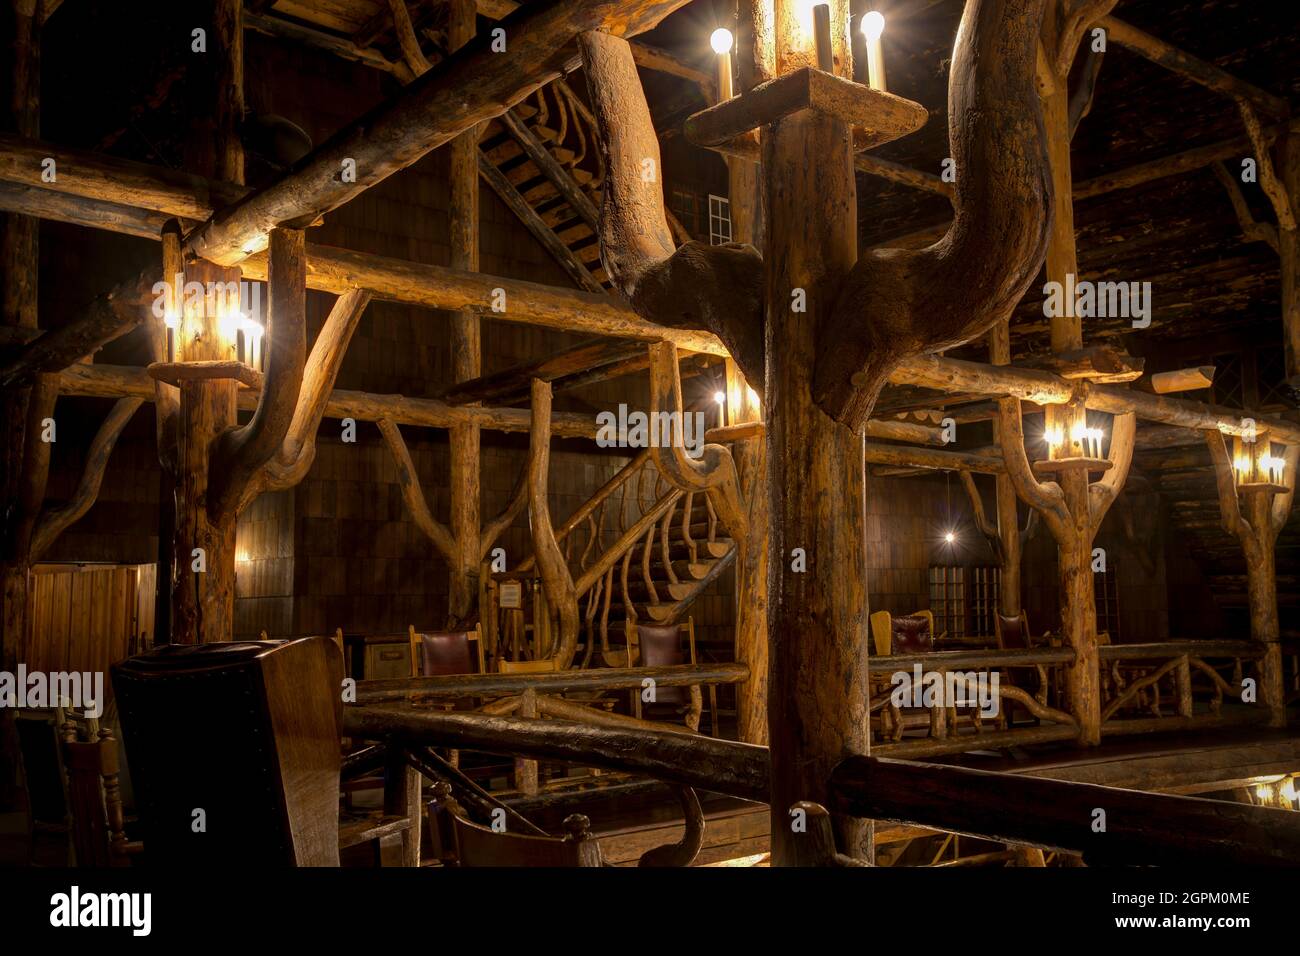 https://c8.alamy.com/comp/2GPM0ME/interior-of-the-historical-old-faithful-inn-hotel-lobby-yellowstone-national-park-wyoming-usa-2GPM0ME.jpg